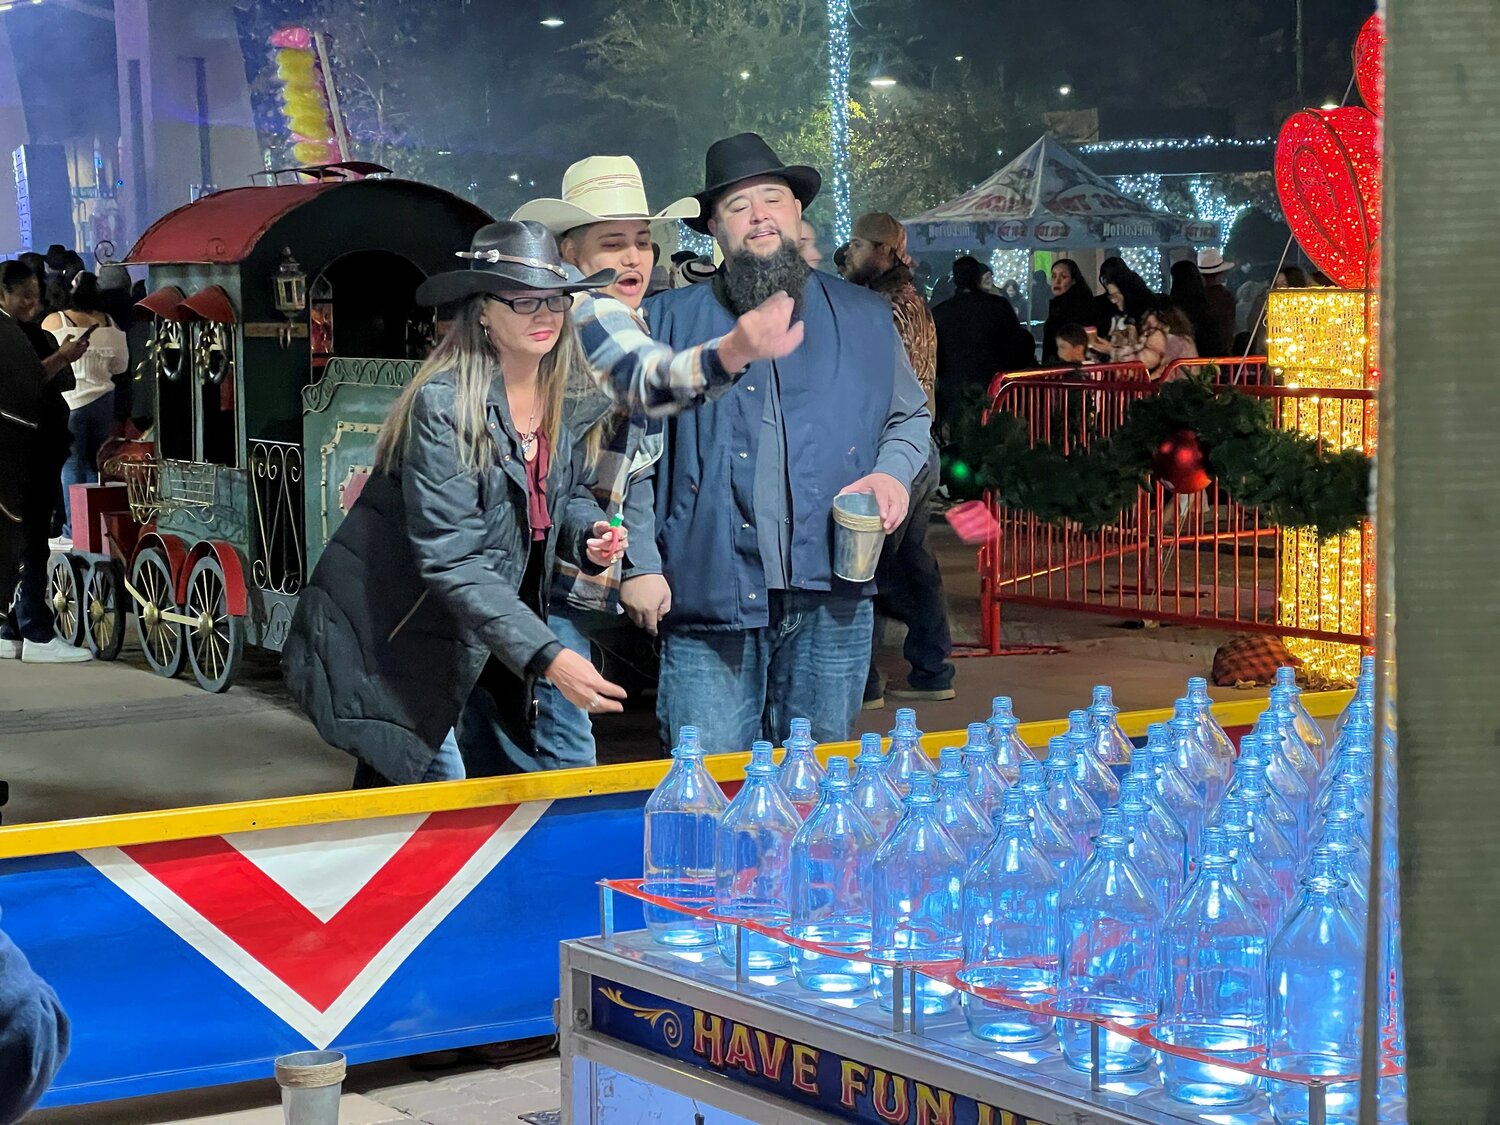 The New Year’s Eve Chile Drop included live music, dancing, food and refreshments and an array of carnival games like this ring toss enjoyed by children and adults alike.